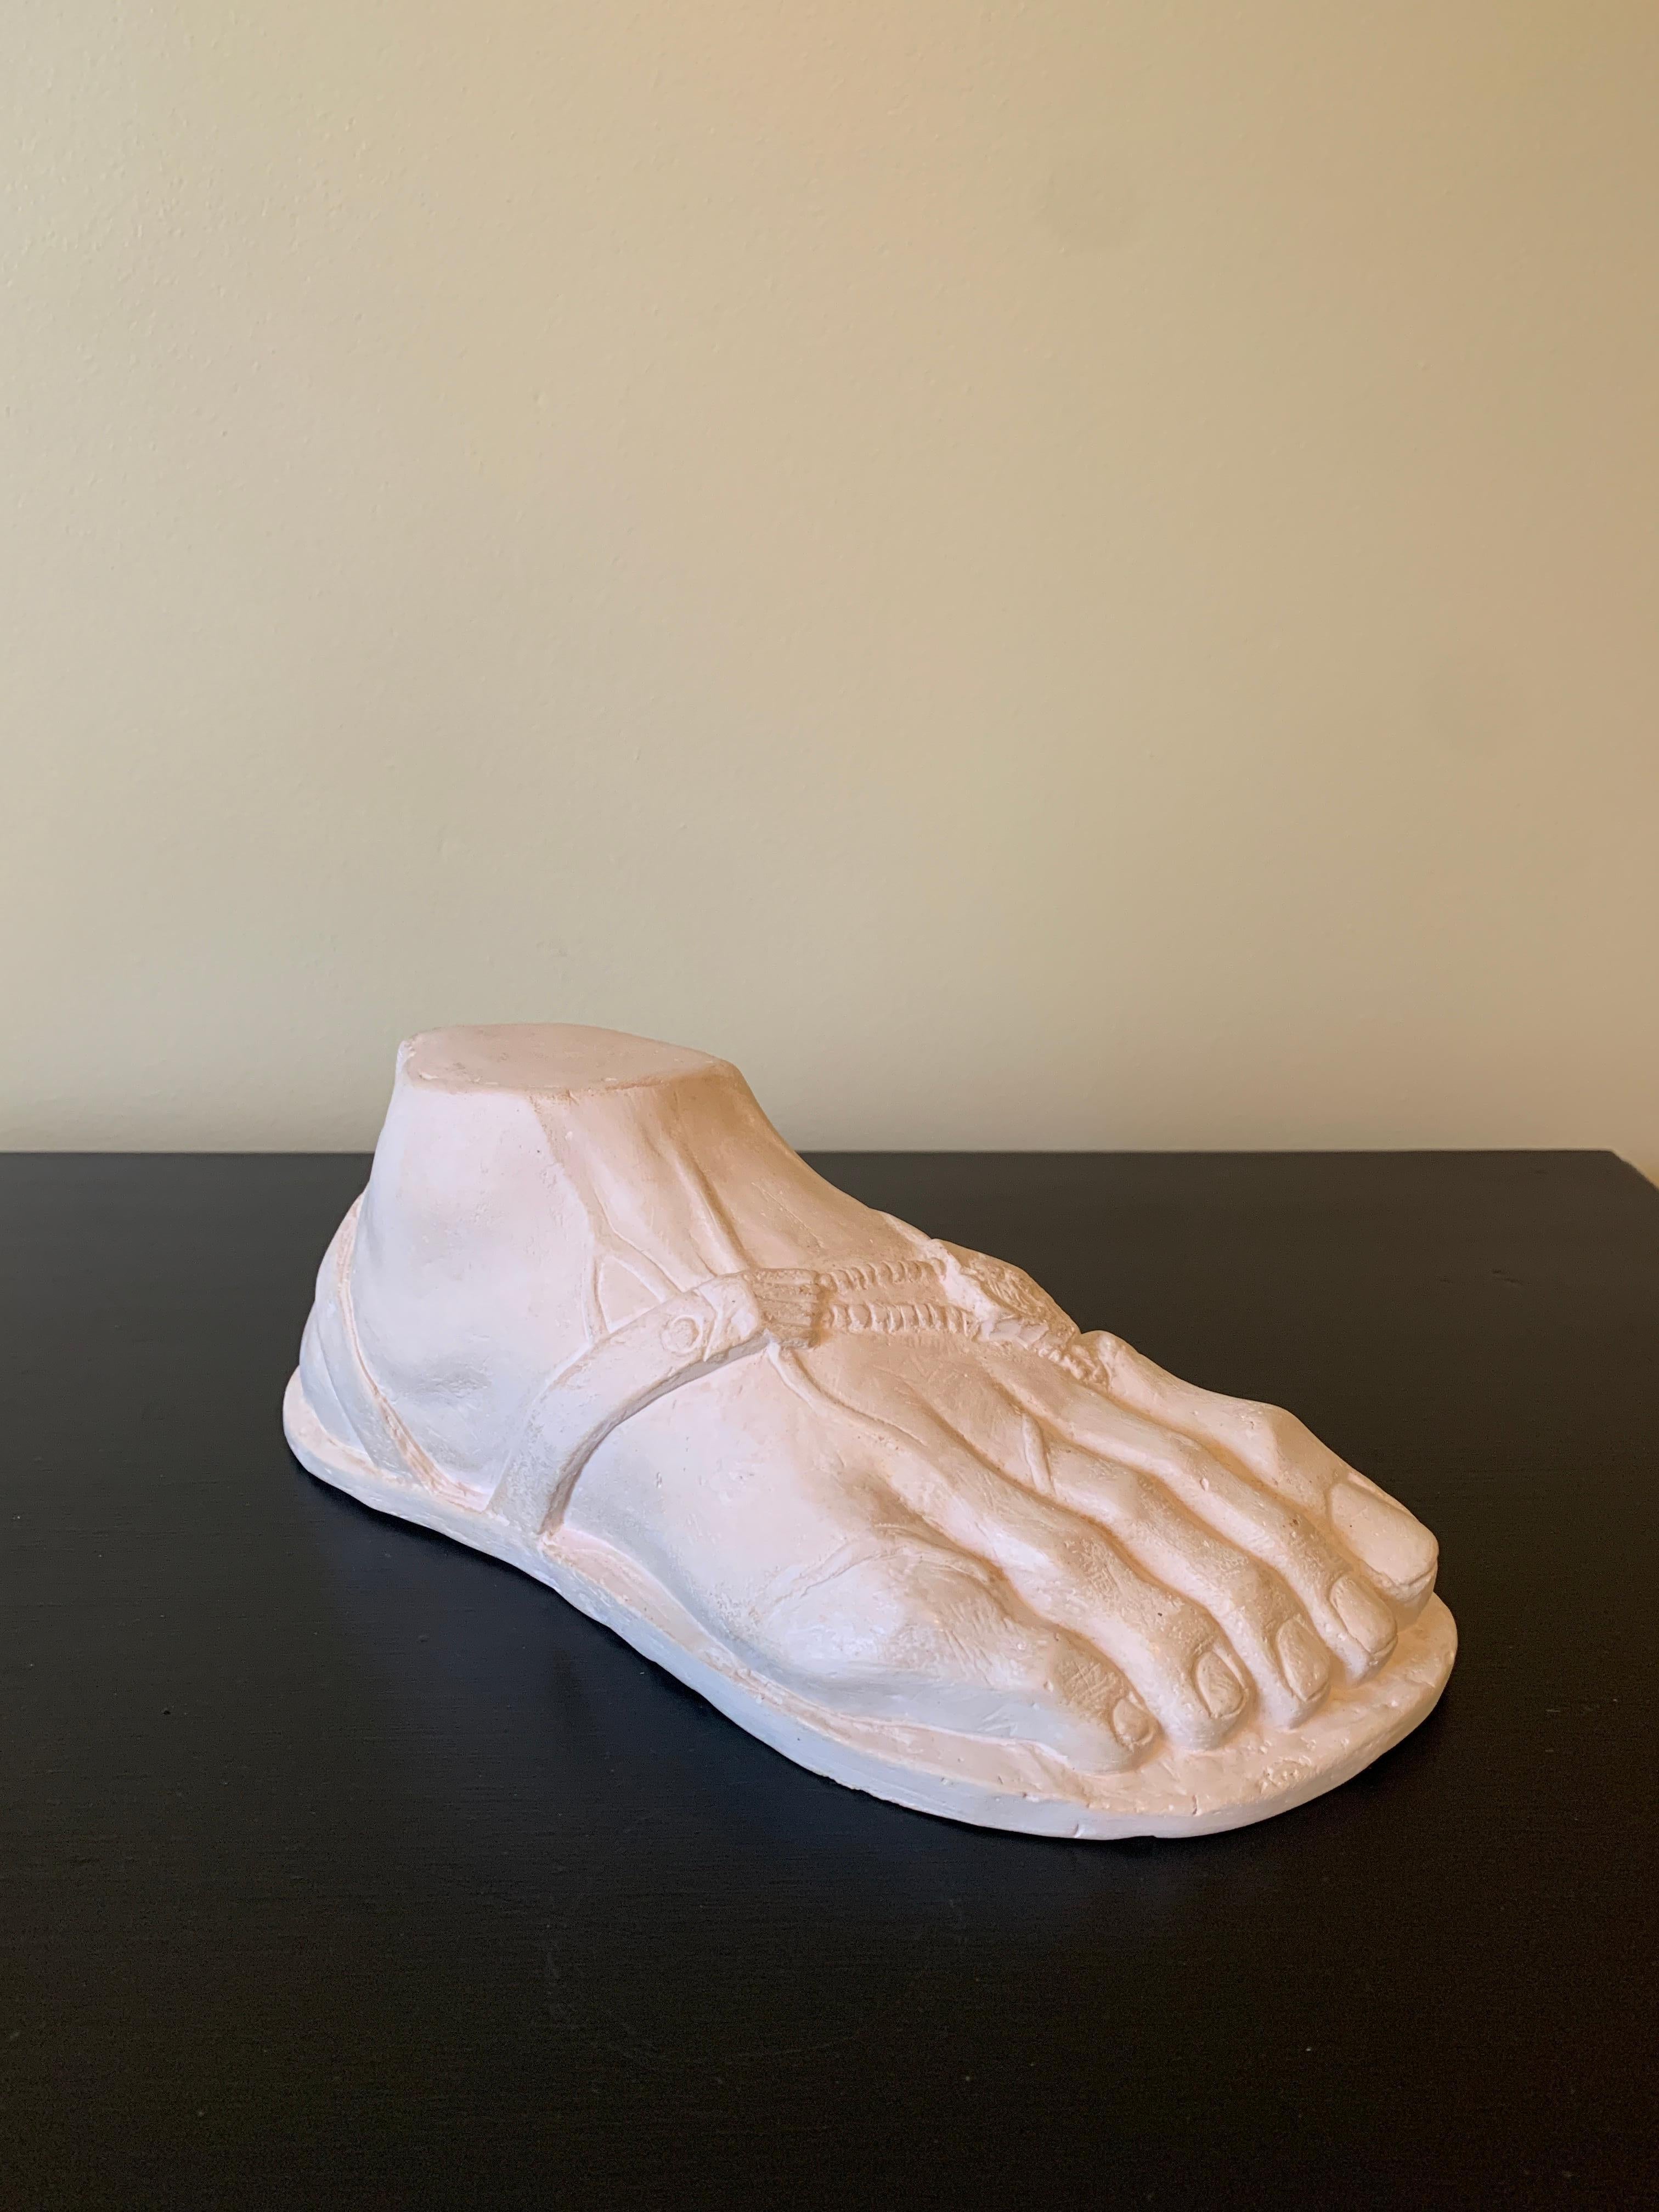 A gorgeous Grand Tour style cast plaster sculpture of an Ancient Greek or Roman foot

Turkey, Early 21st Century

Measures: 11.13